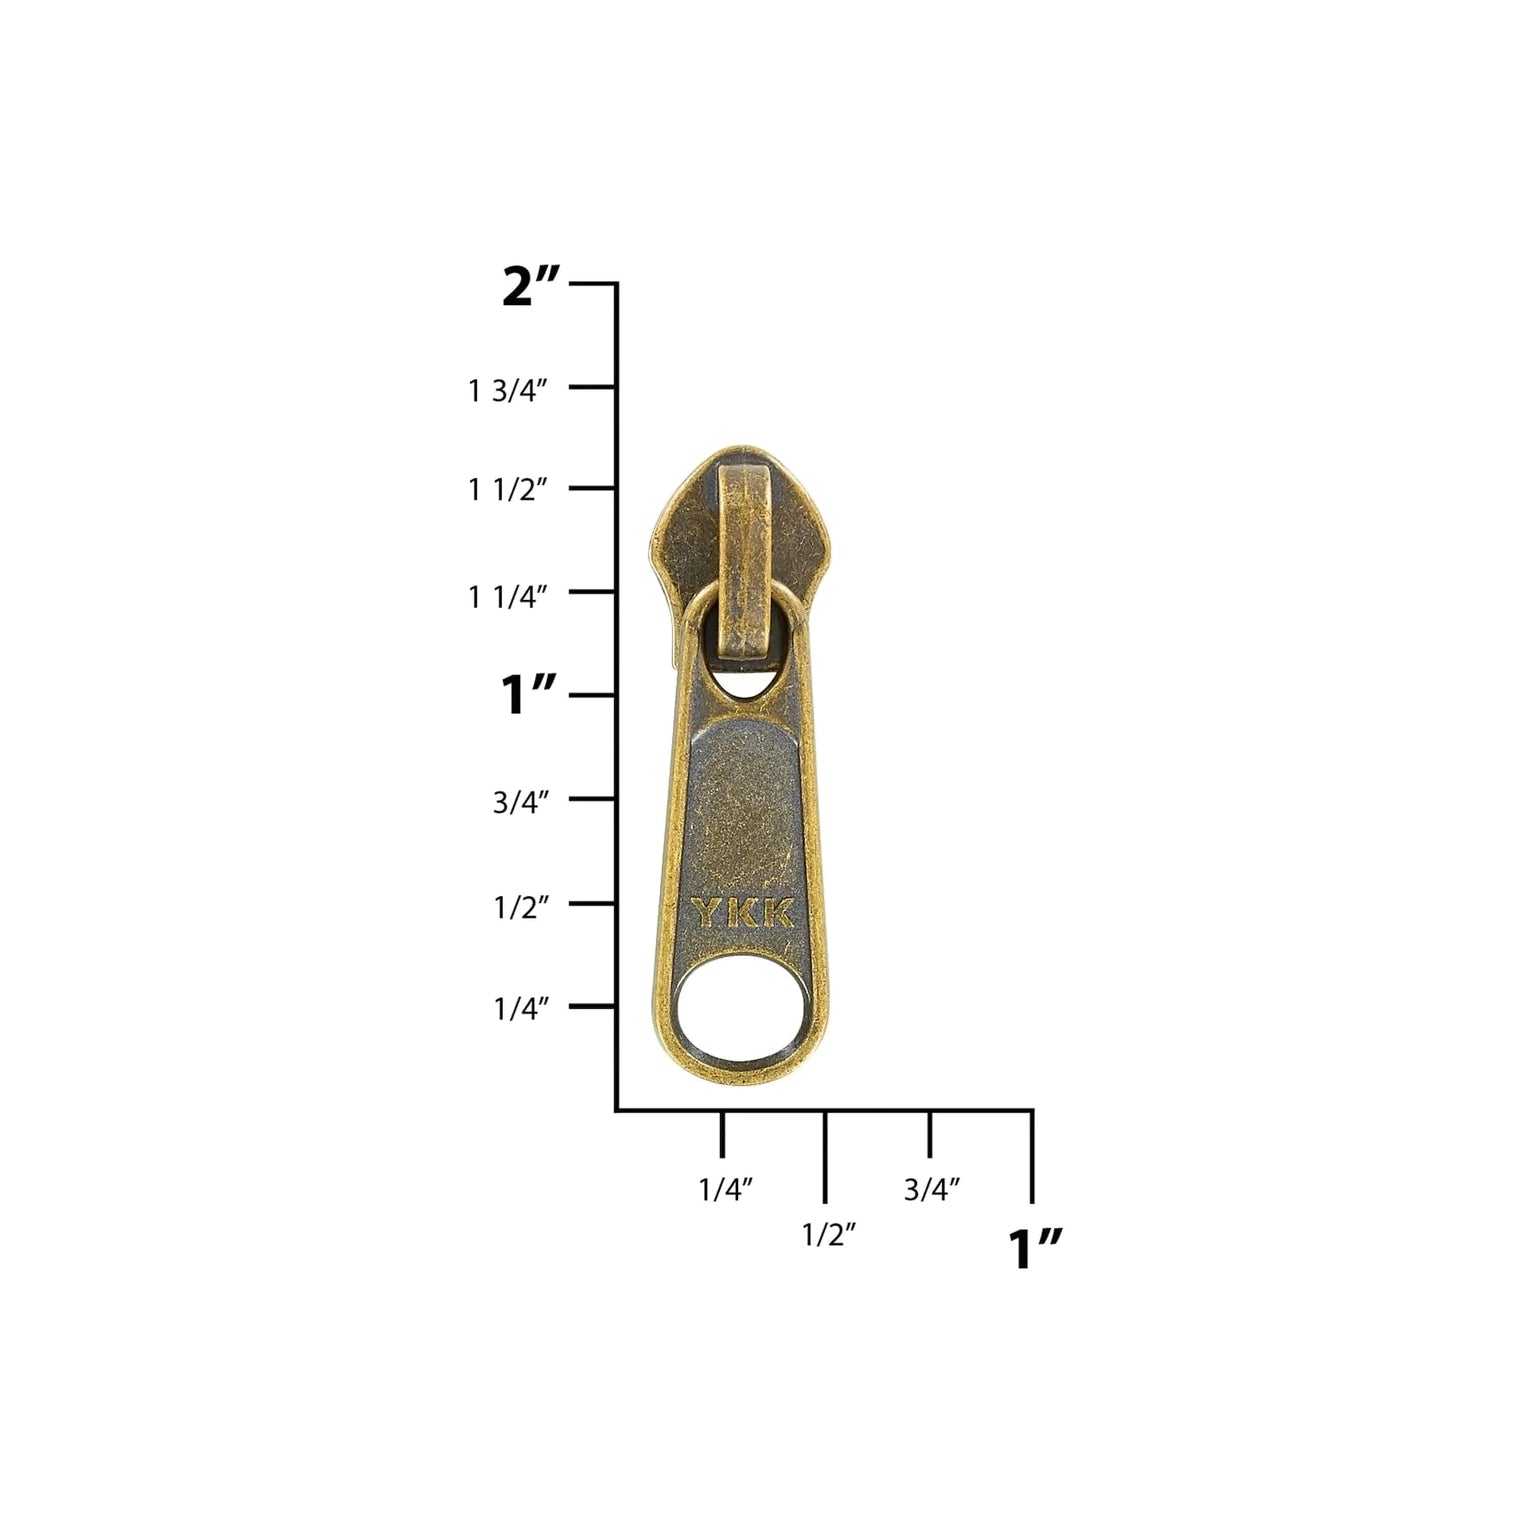 Zipper Pull pull-tab Replacement Nickel or Brass for 